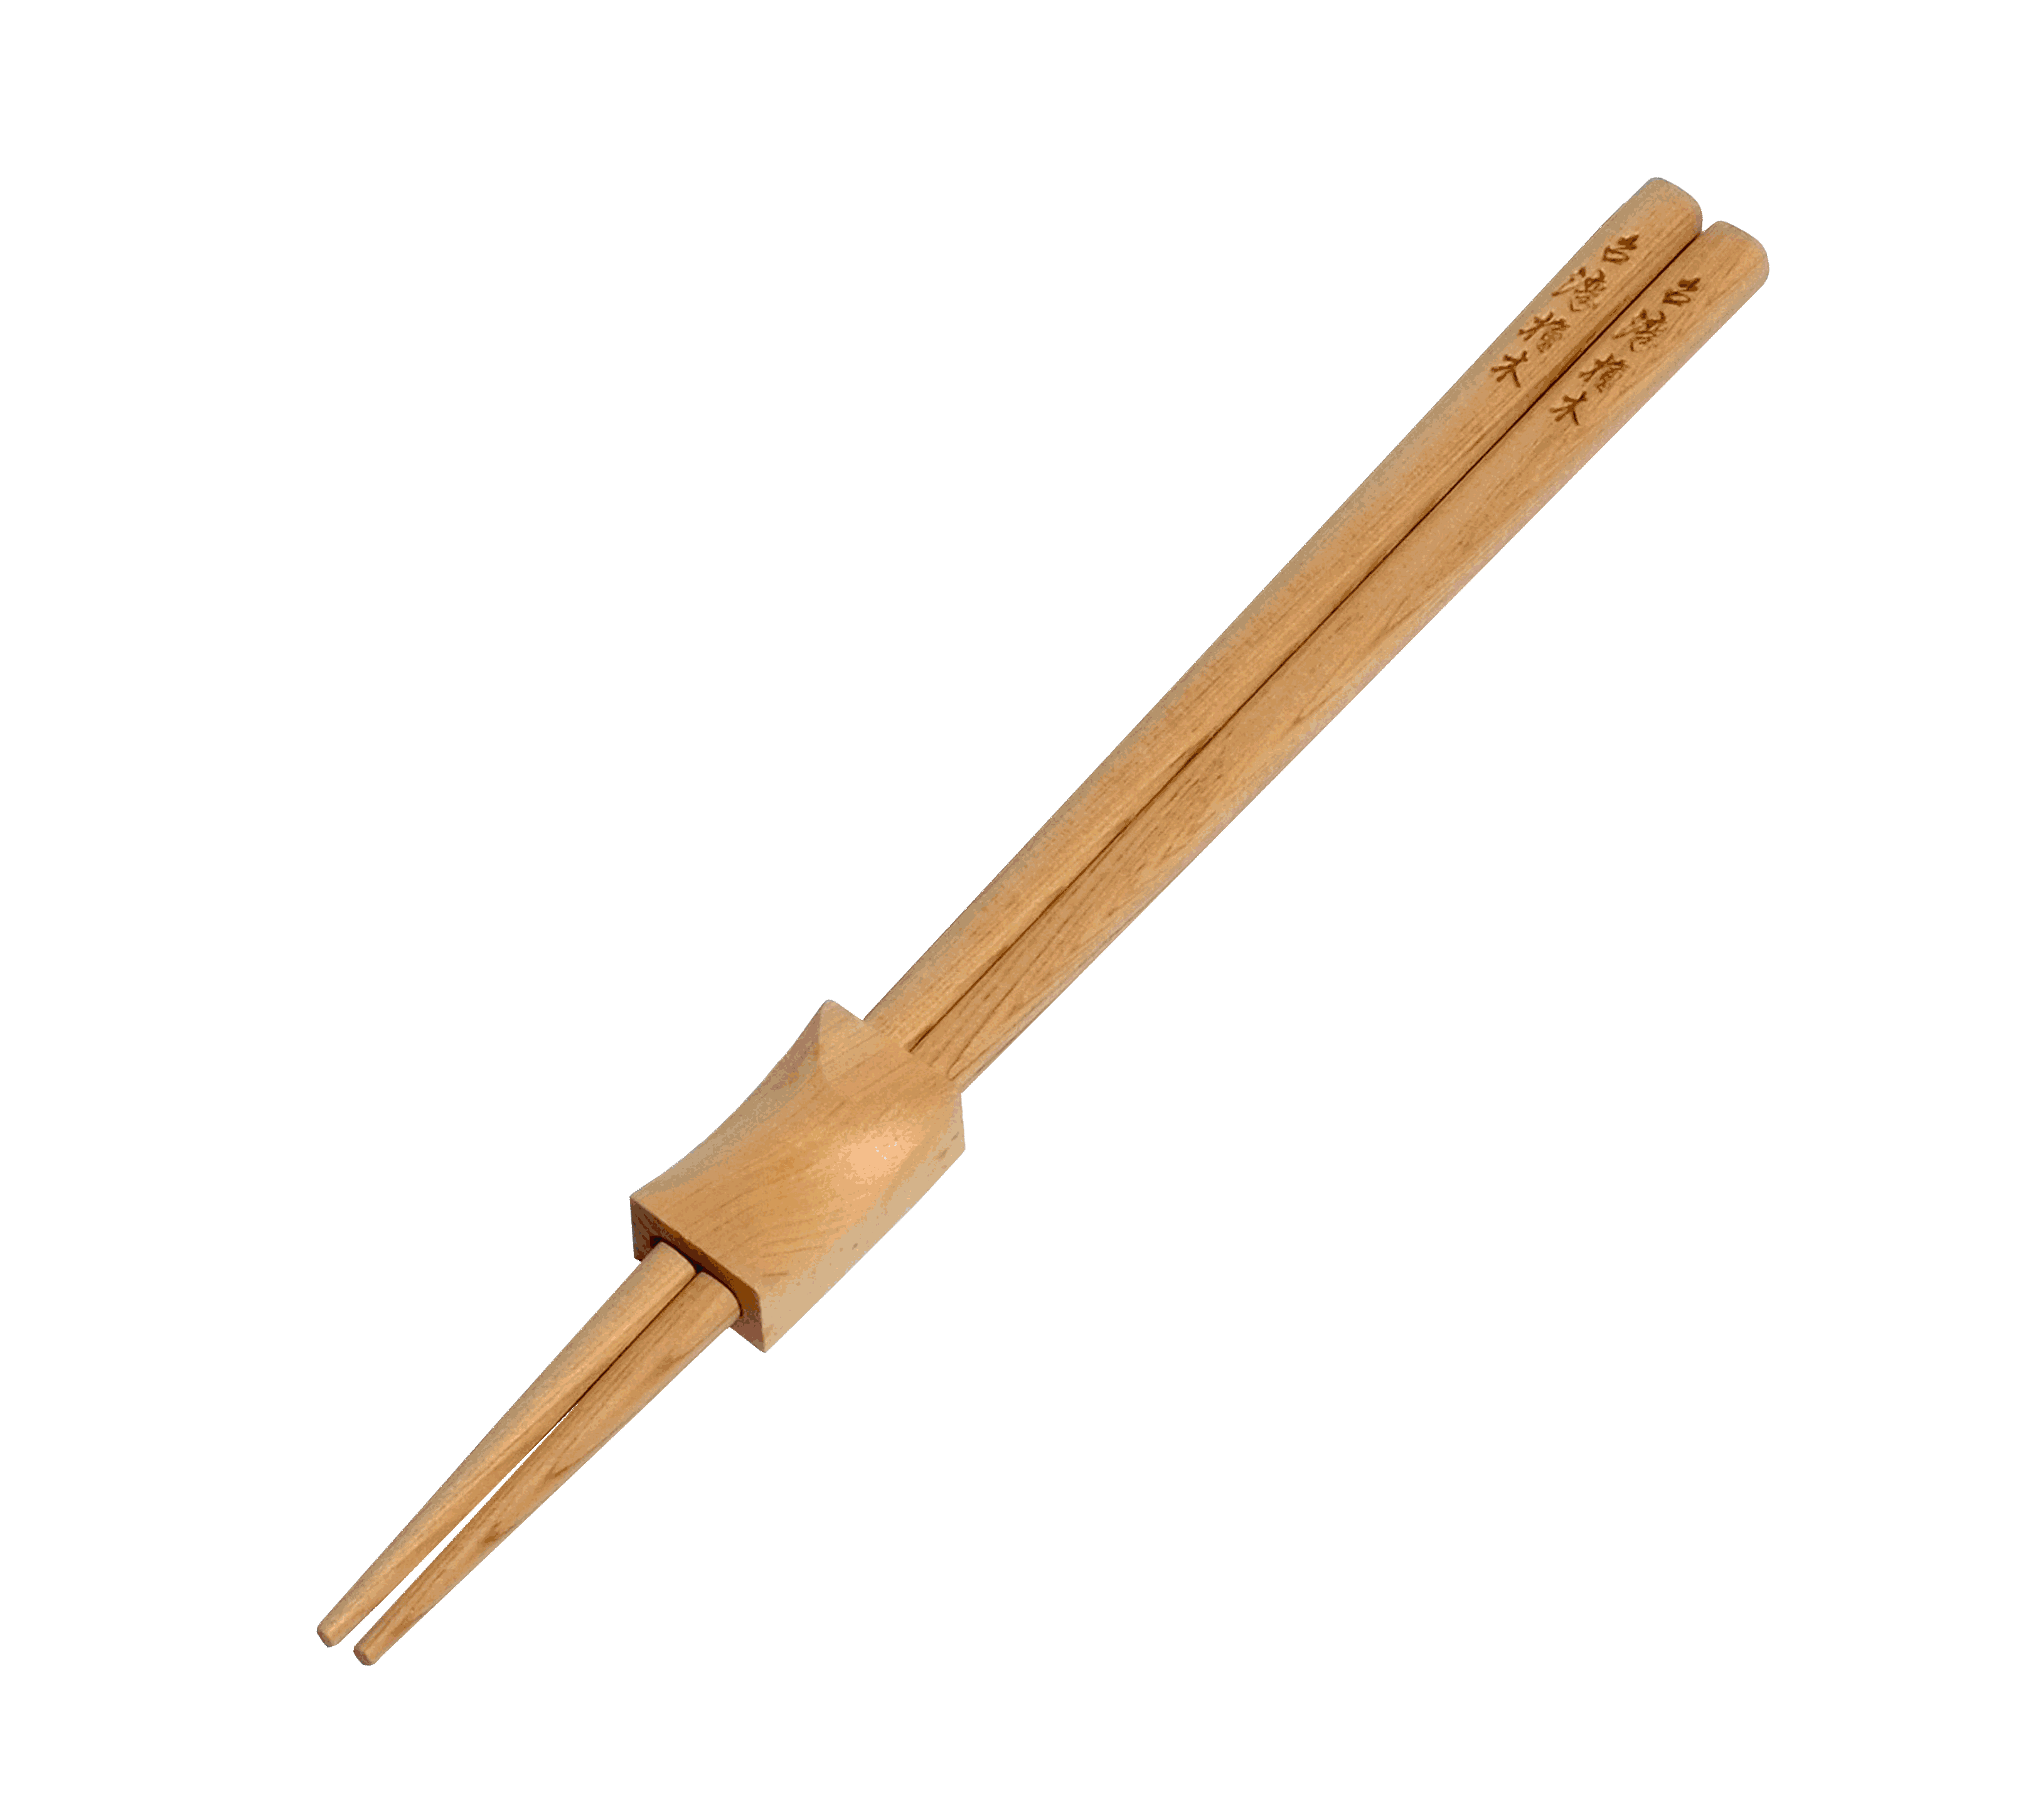 Alternating images of a pair of wood chopsticks, a beer glass and a kitchen knife from the Wax Apple 